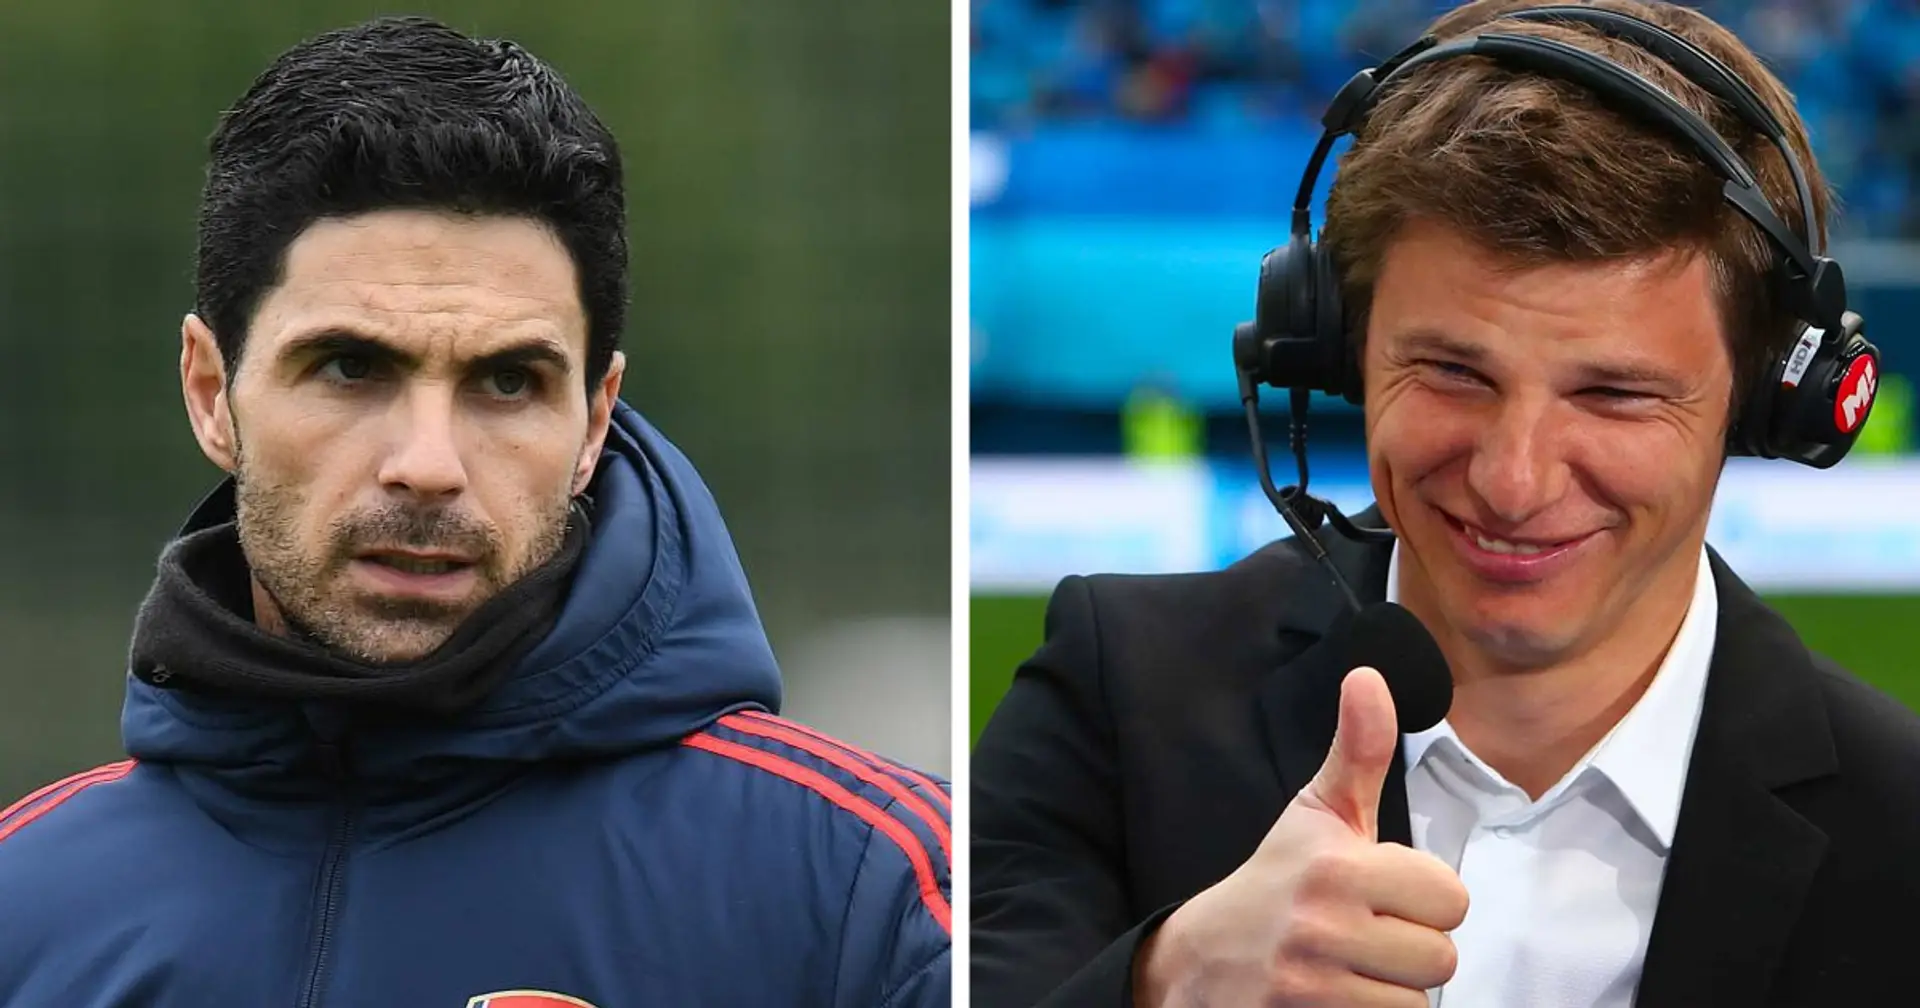 Arshavin on Arteta's impact at Arsenal: 'They have changed, not too much but in a good way'